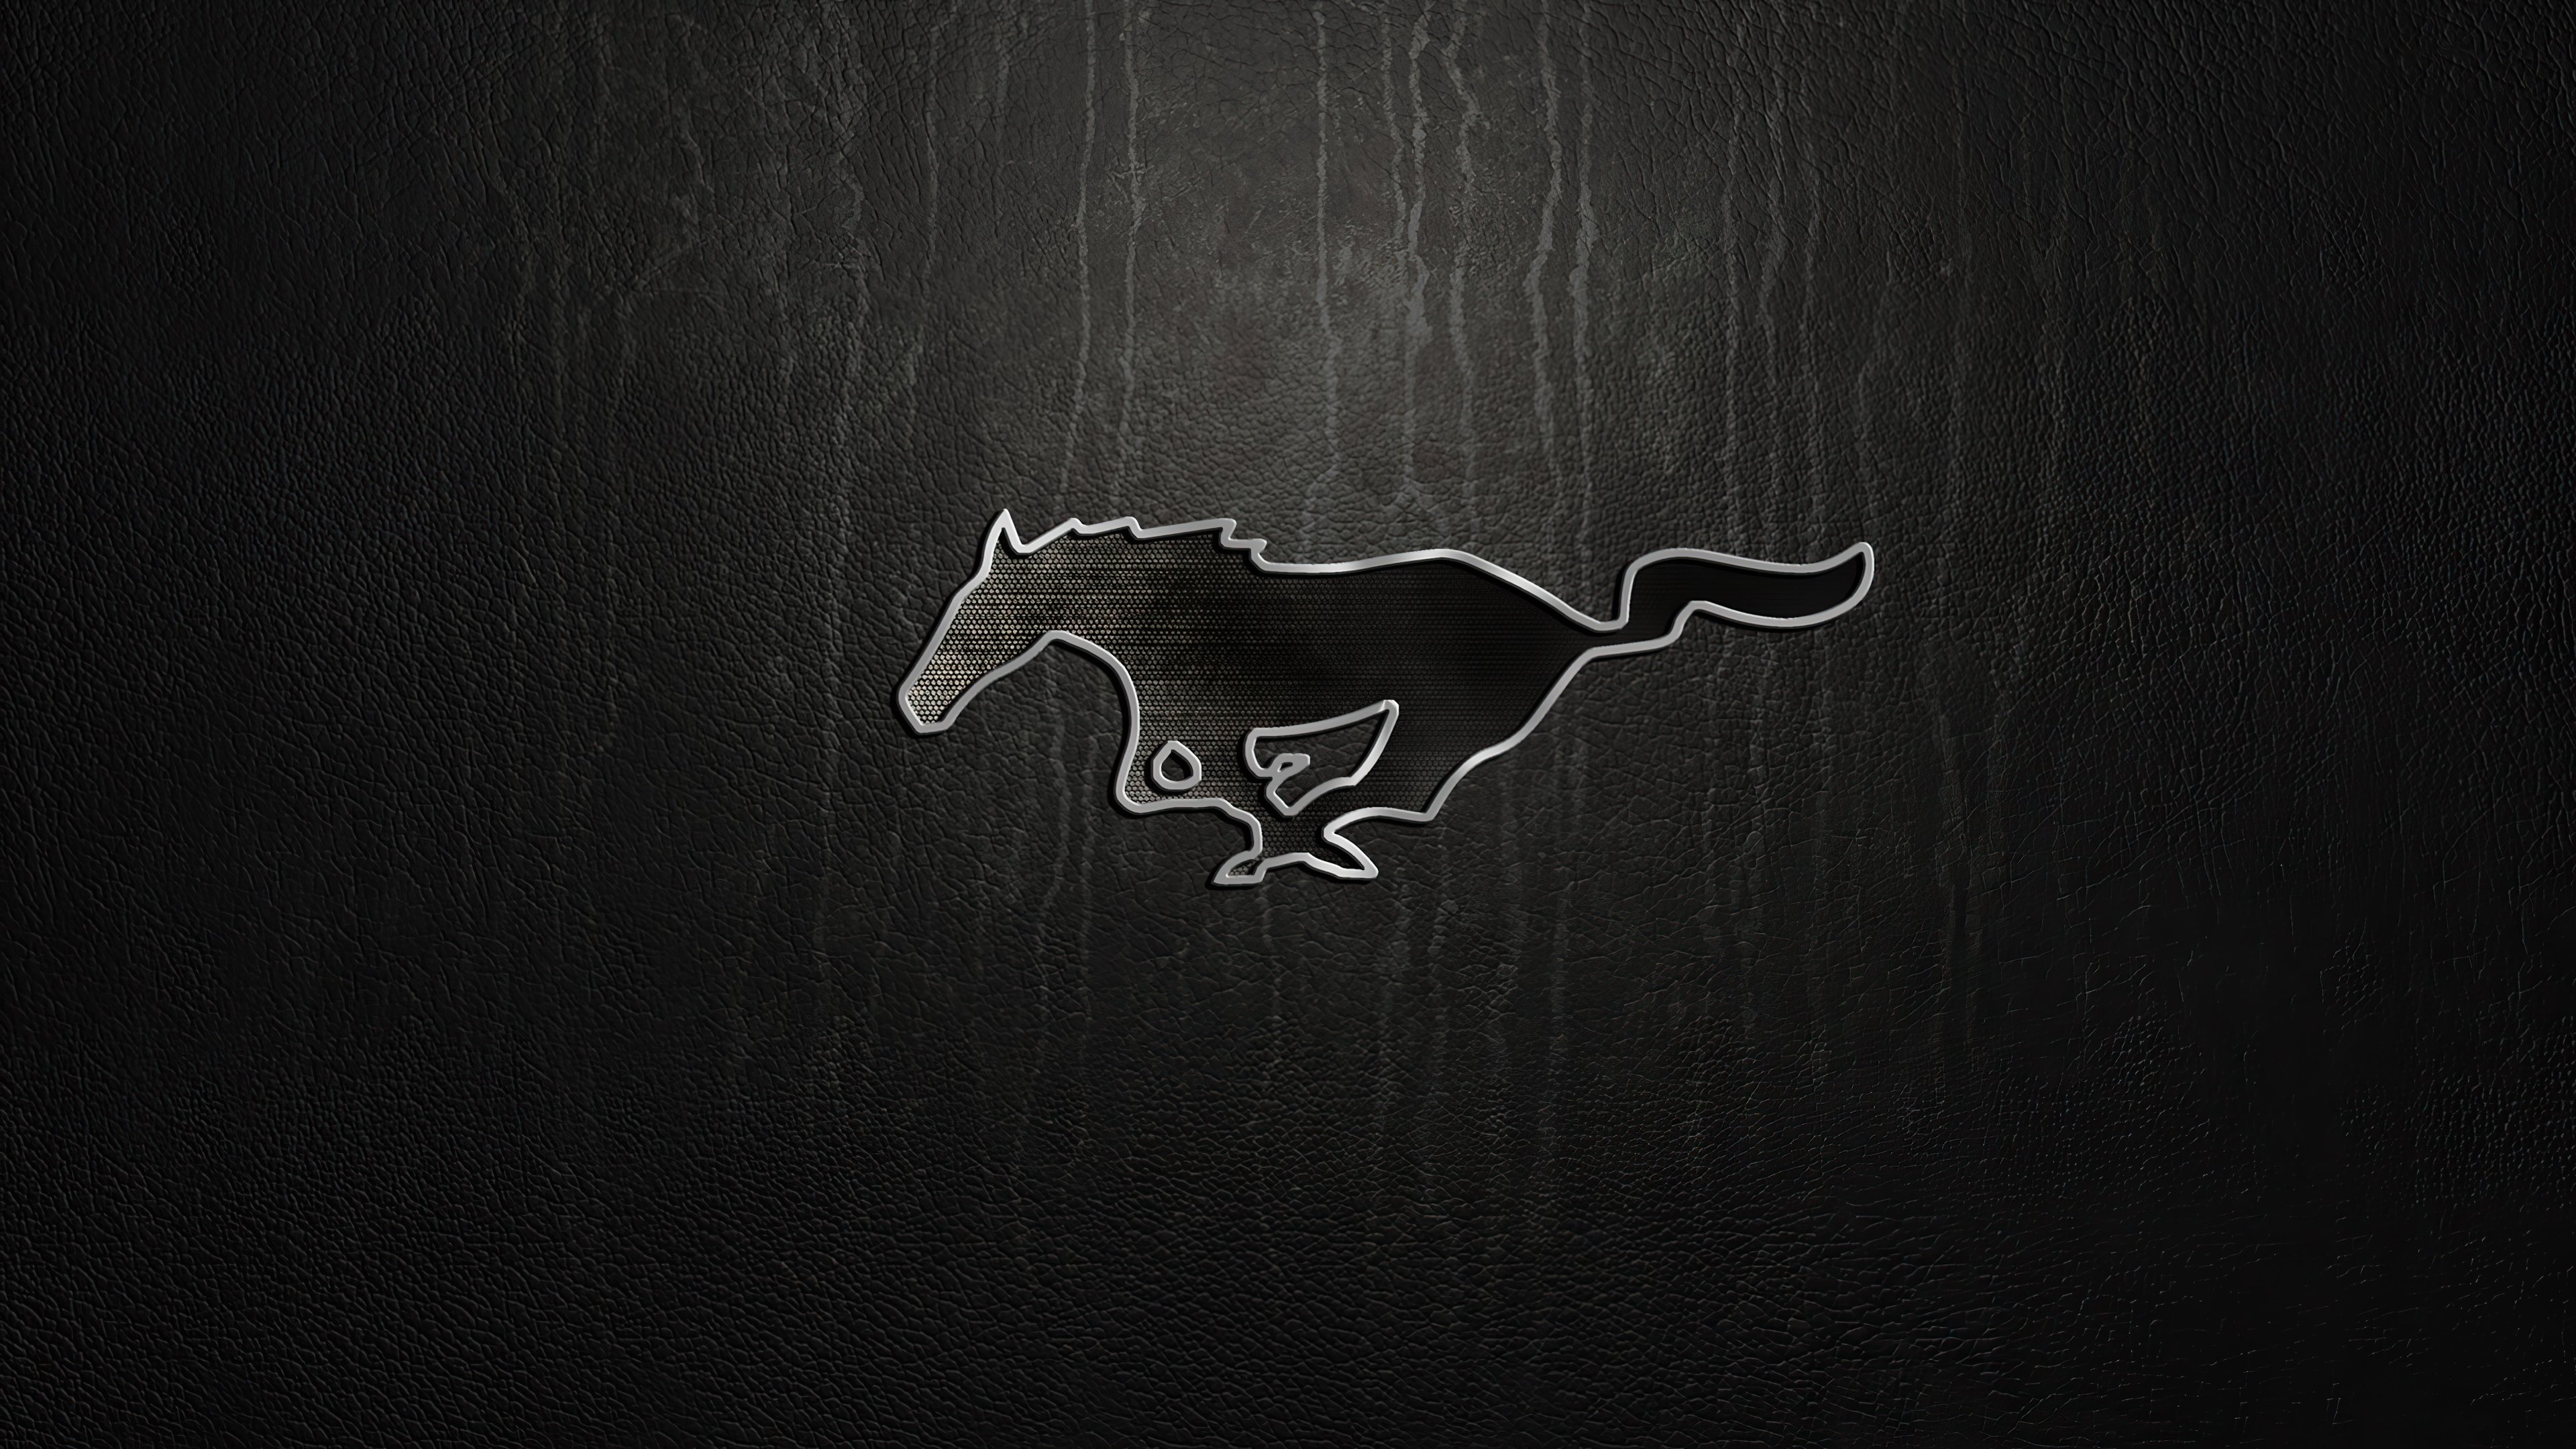 Mustang logo inspired by football game?